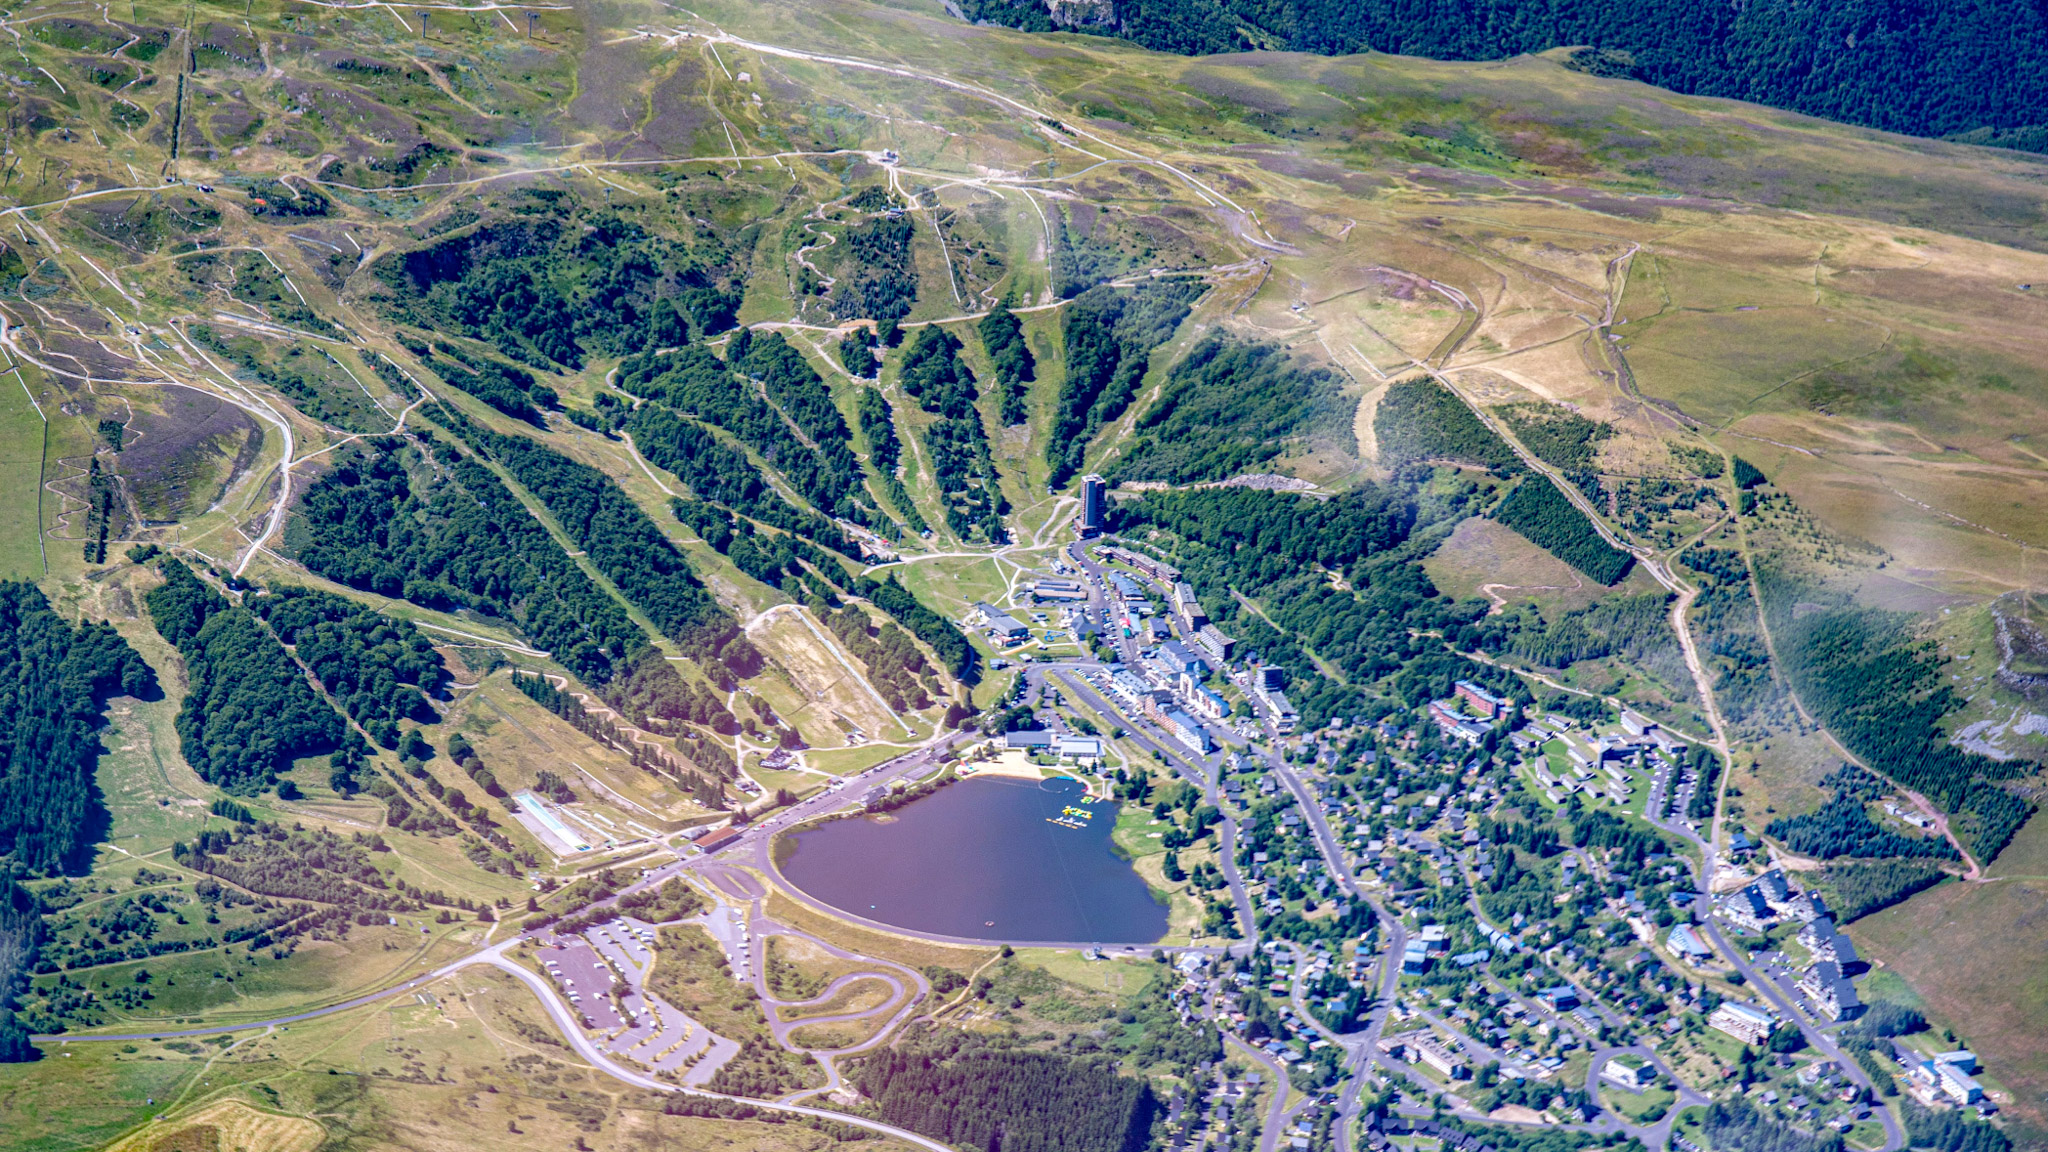 Super Besse resort, view of the Lac des Hermines and the center of the Super Besse resort